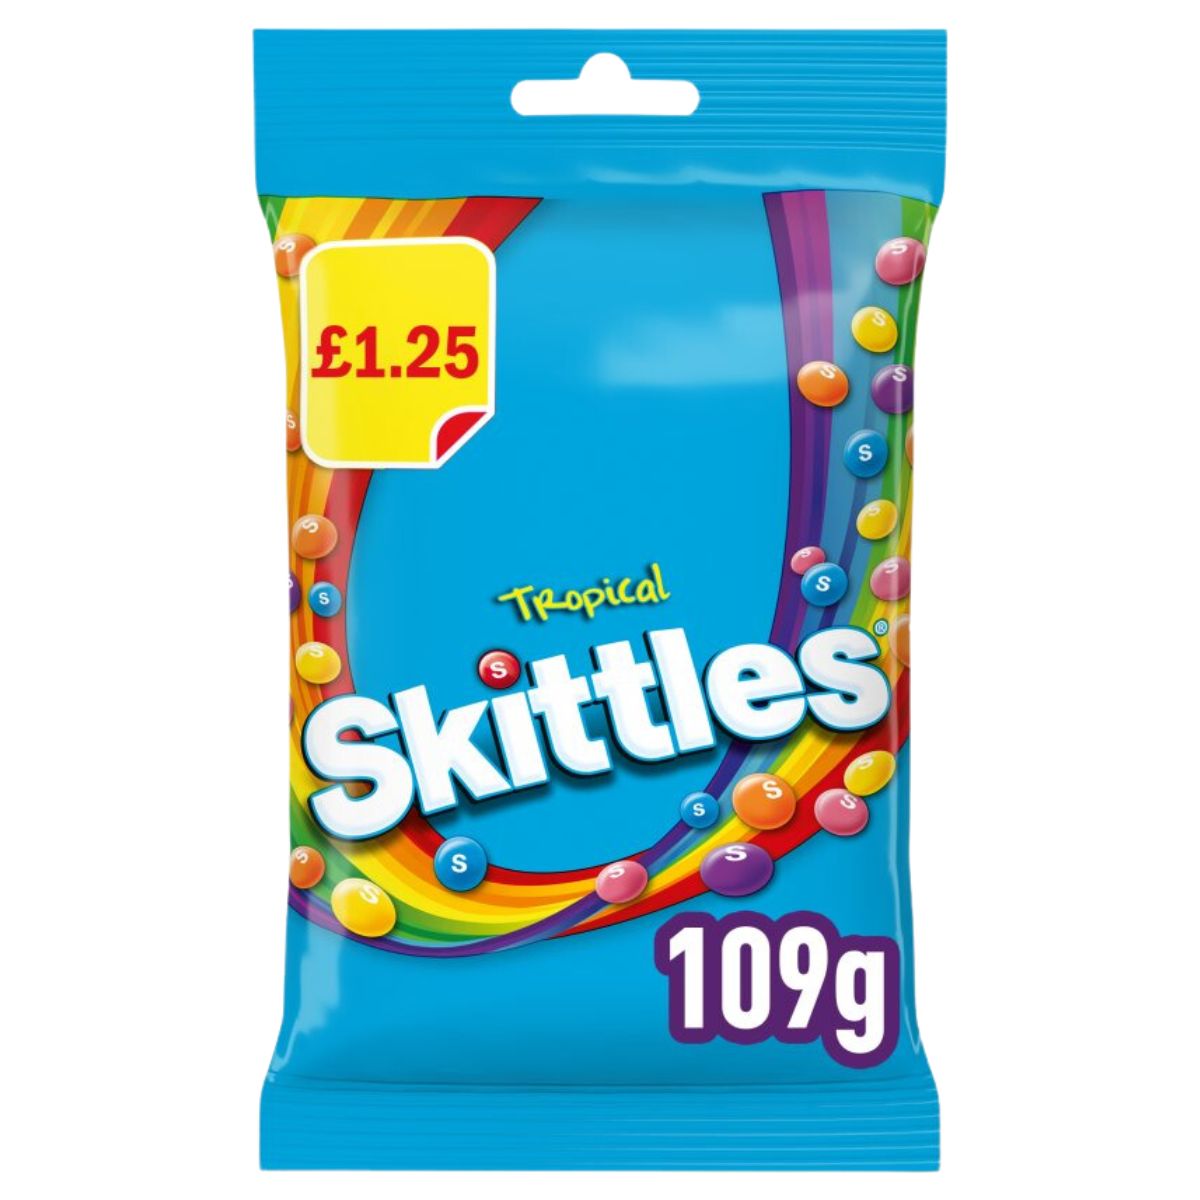 A Skittles - Tropical Treat Bag - 109g on a white background.